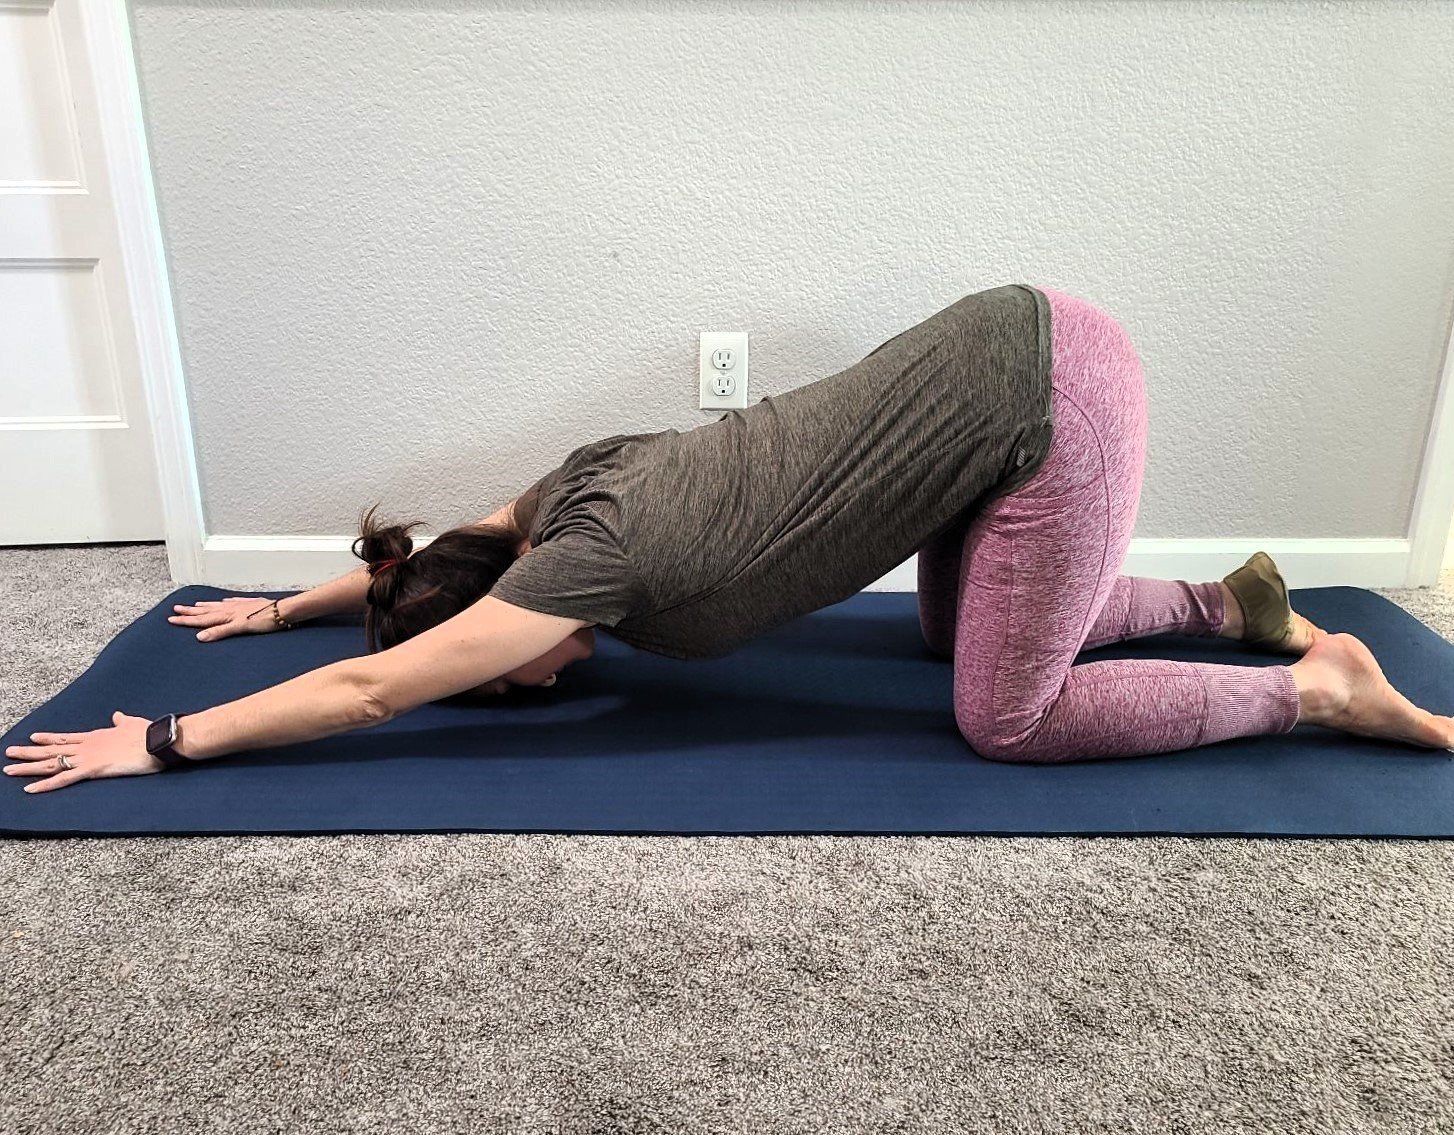 Extended puppy pose (anahatasana)